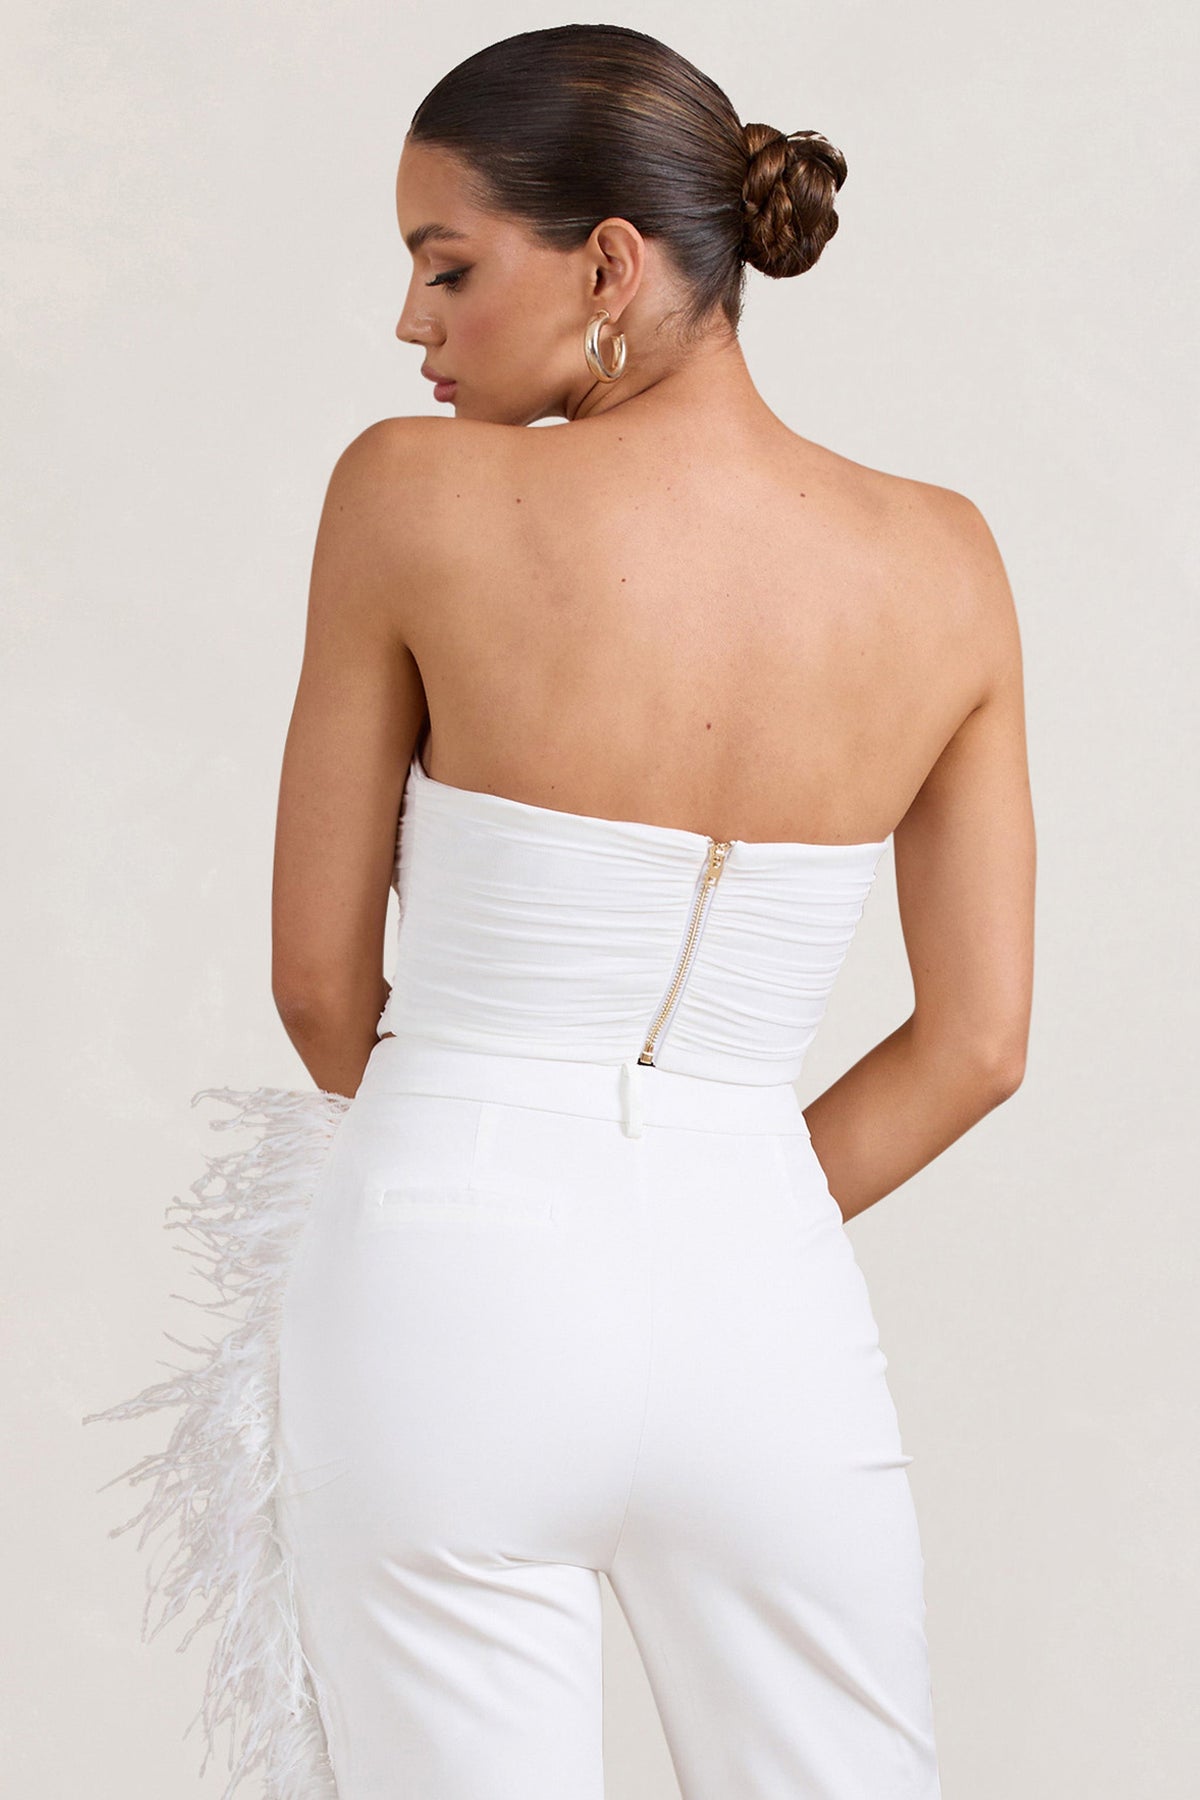 All About You White Feather Bandeau Corset Top – Club L London - USA